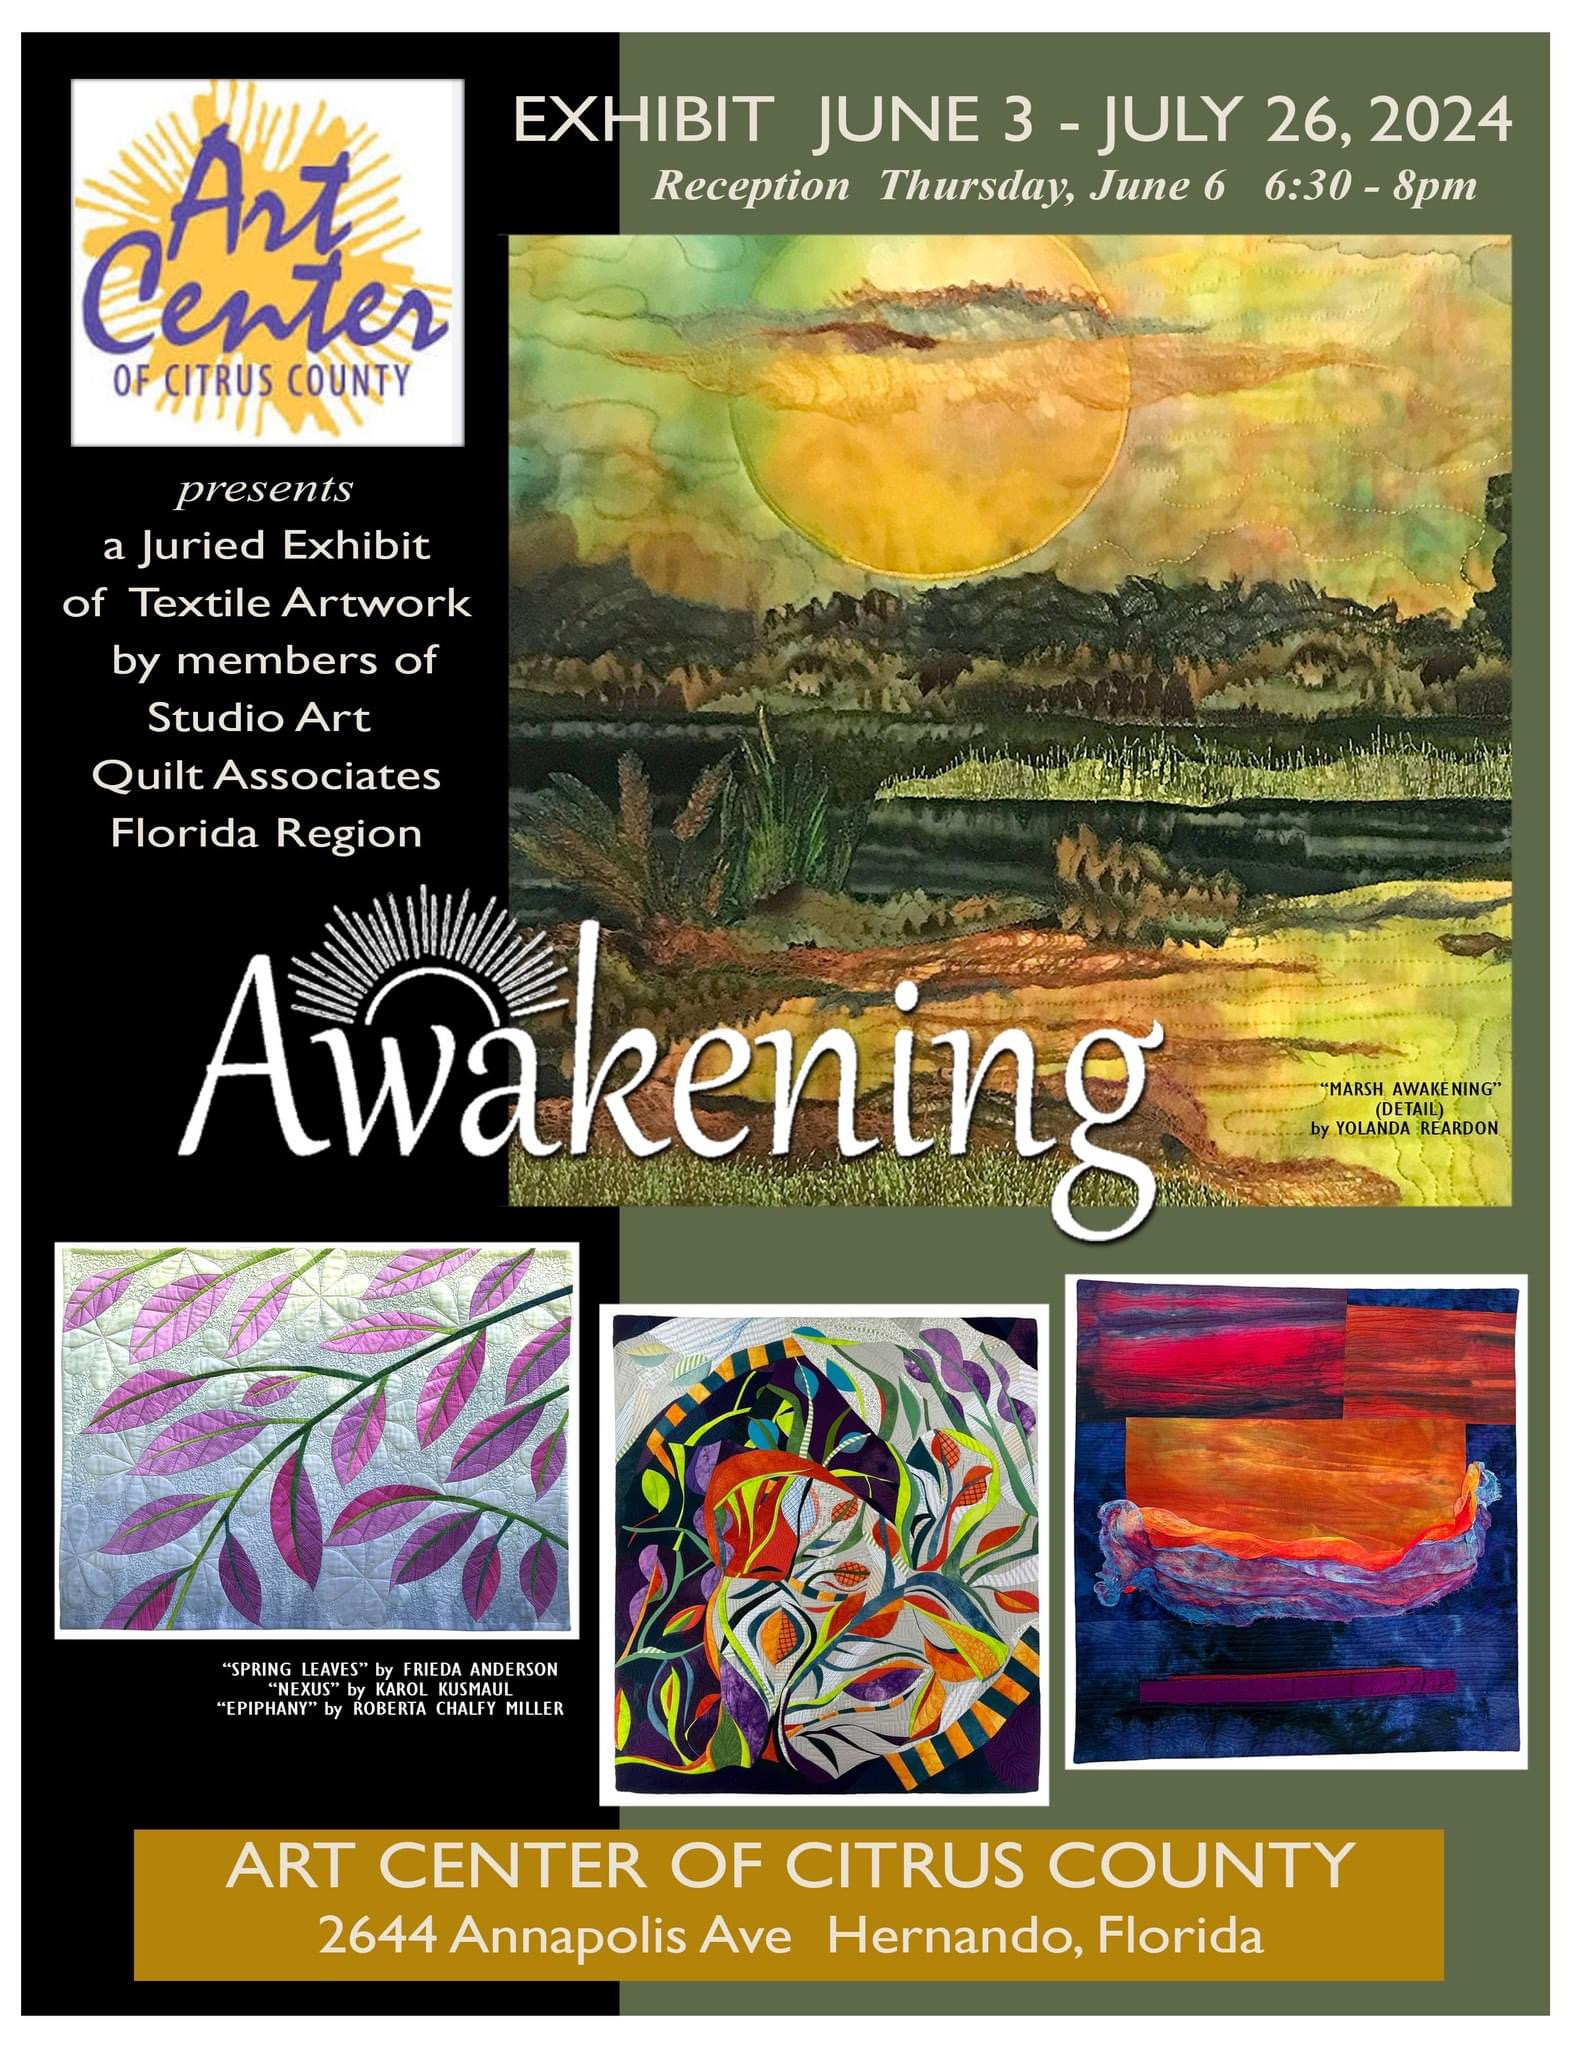 The Art Center of Citrus County is proud to present the SAQA traveling quilt exhibit